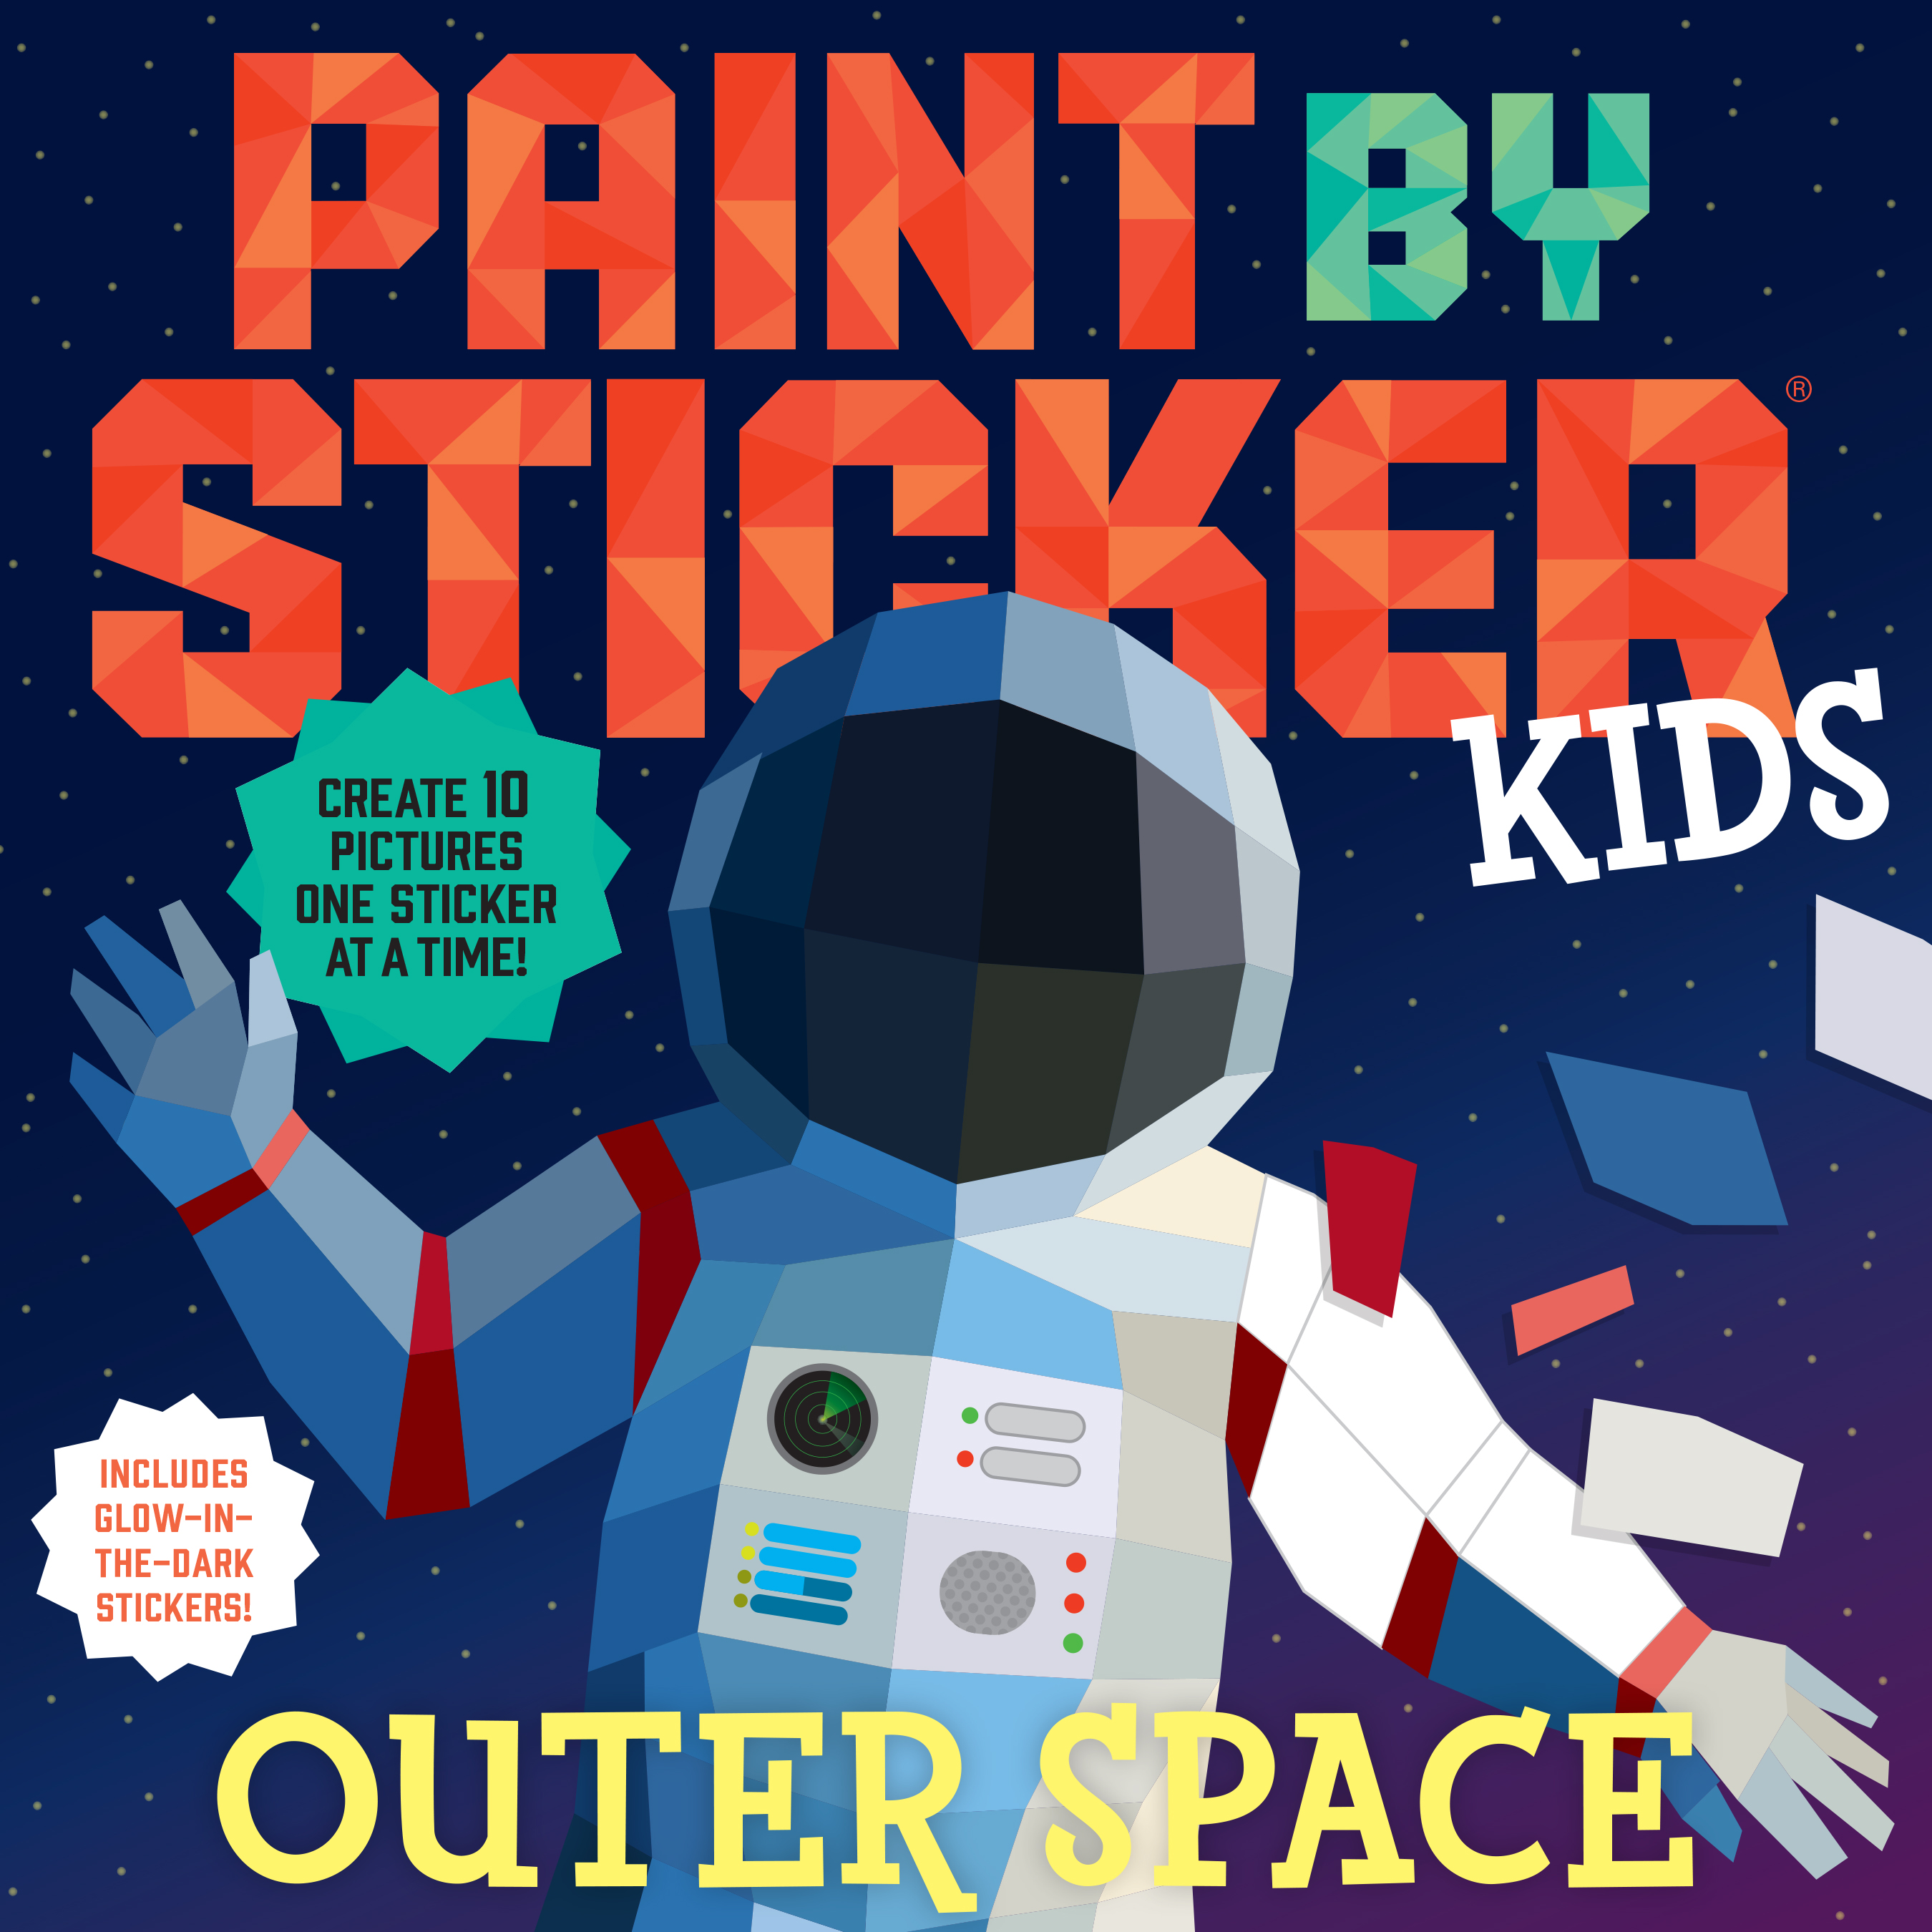  Paint by Sticker: Birds: Create 12 Stunning Images One Sticker  at a Time!: 9781523500123: Workman Publishing: Books